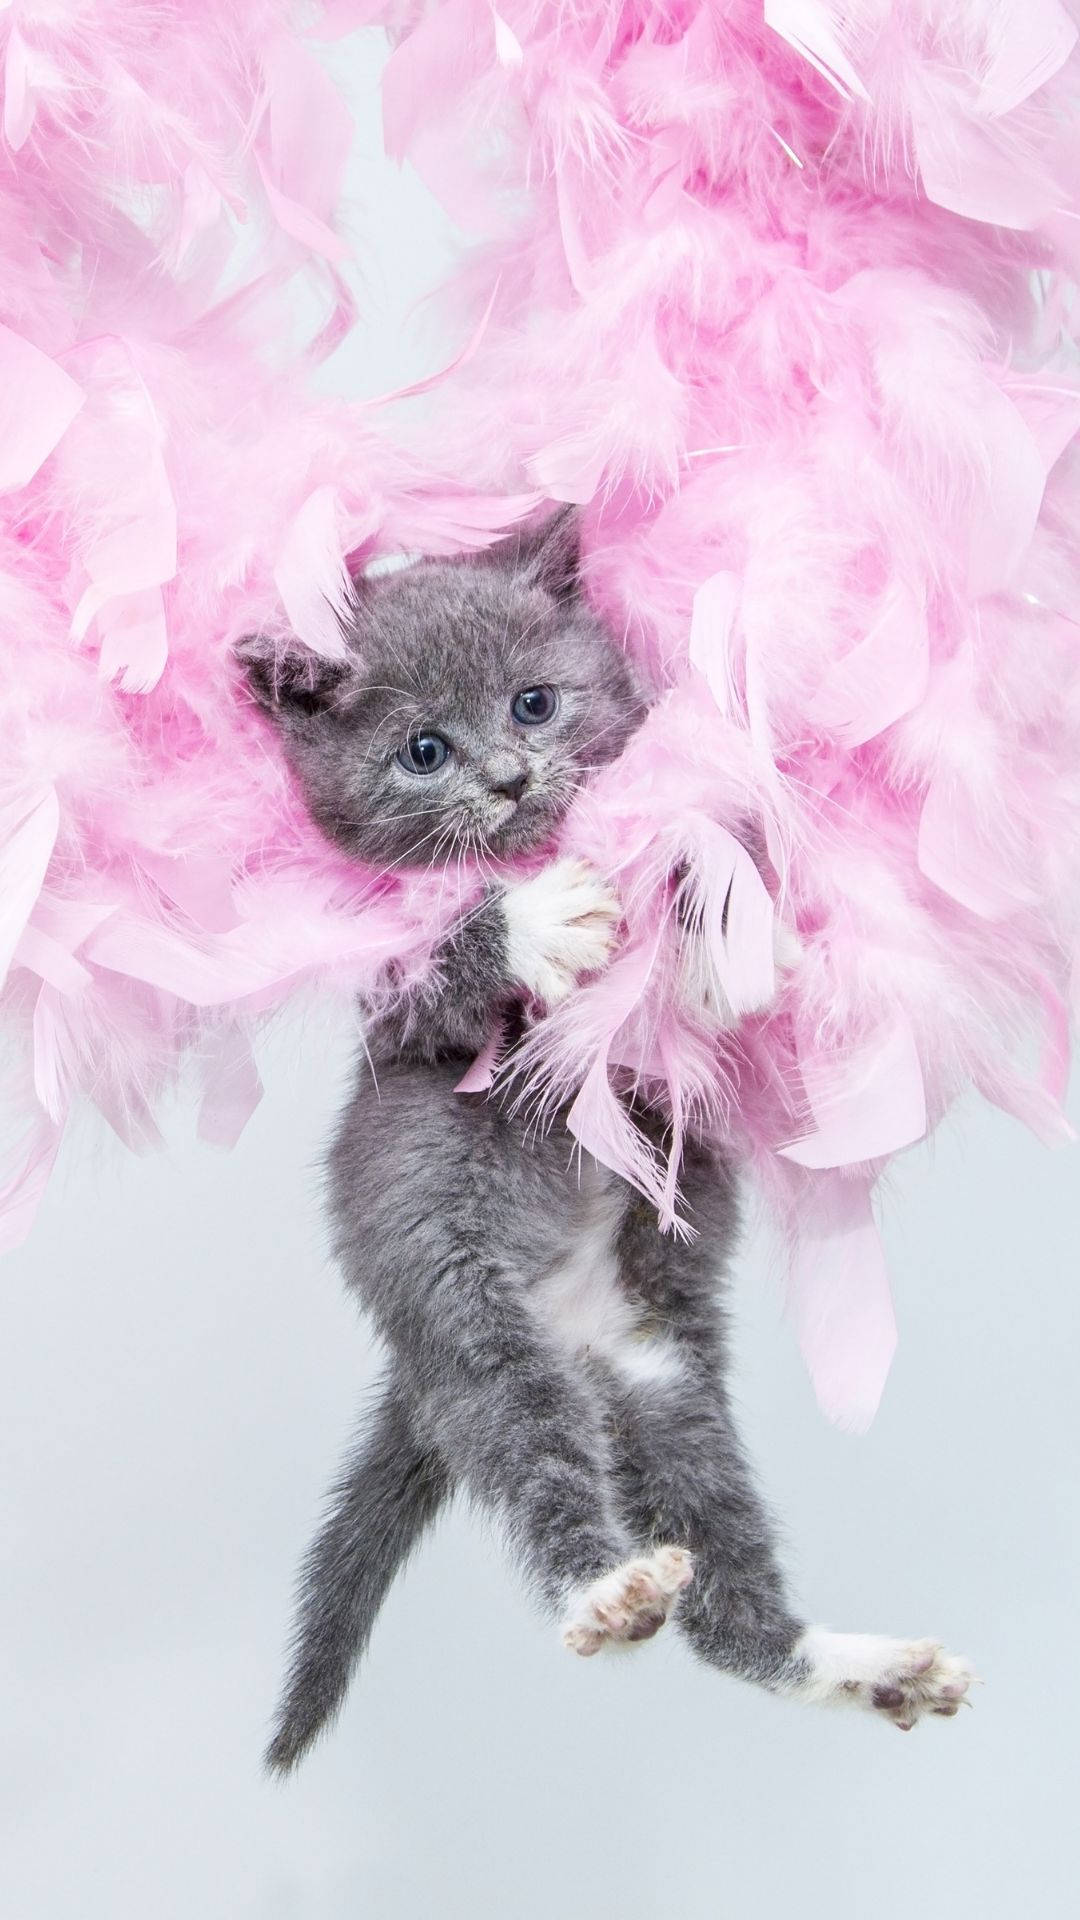 Ipod Touch Gray Kitten On Pink Feathers